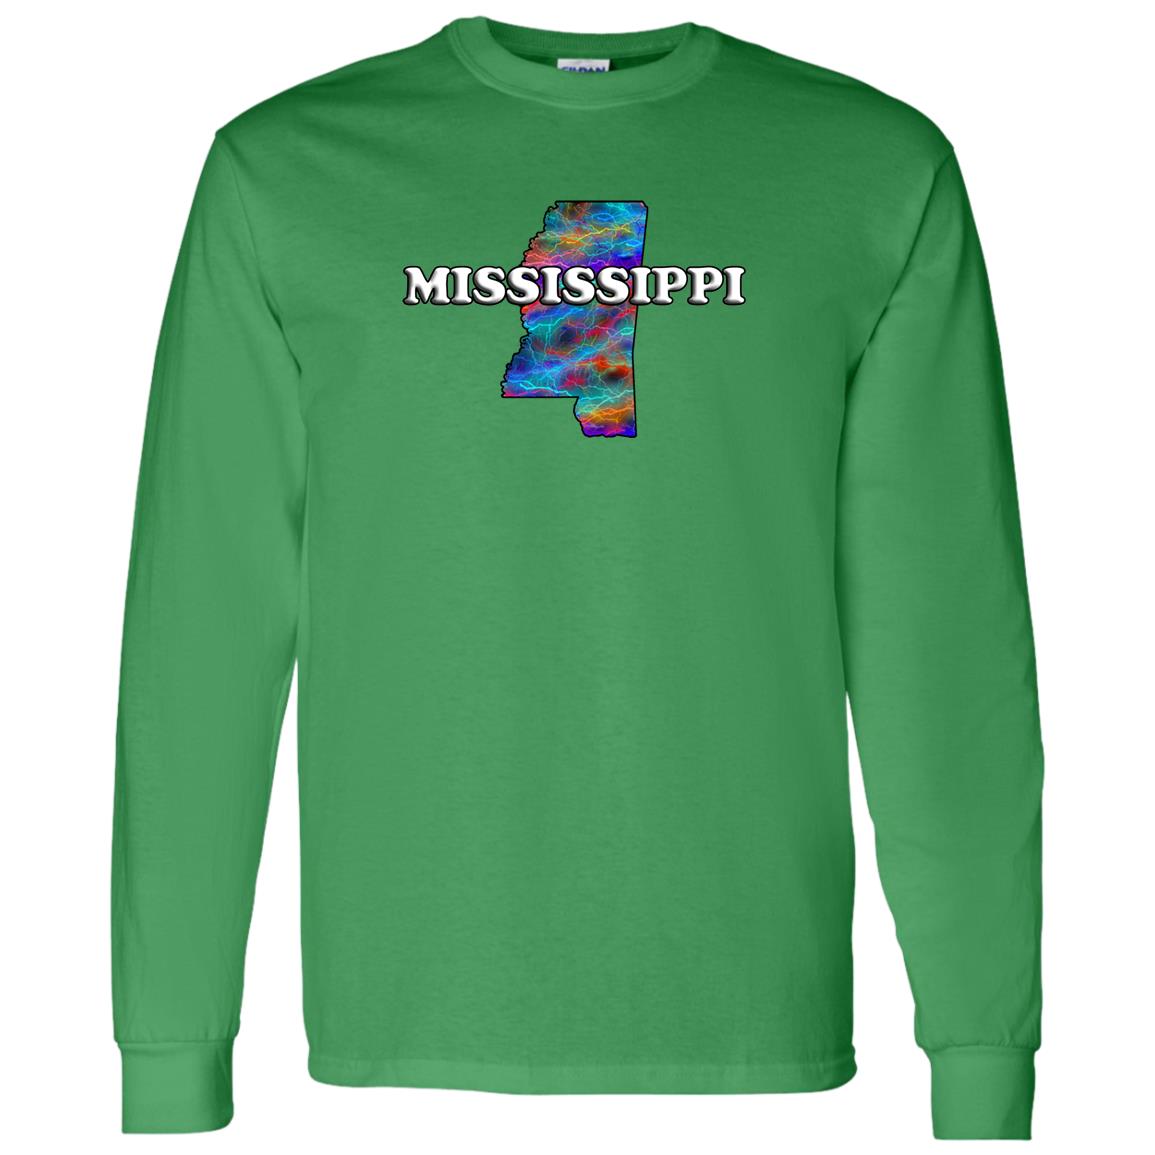 MISSISSIPPI LONG SLEEVE STATE T-SHIRT